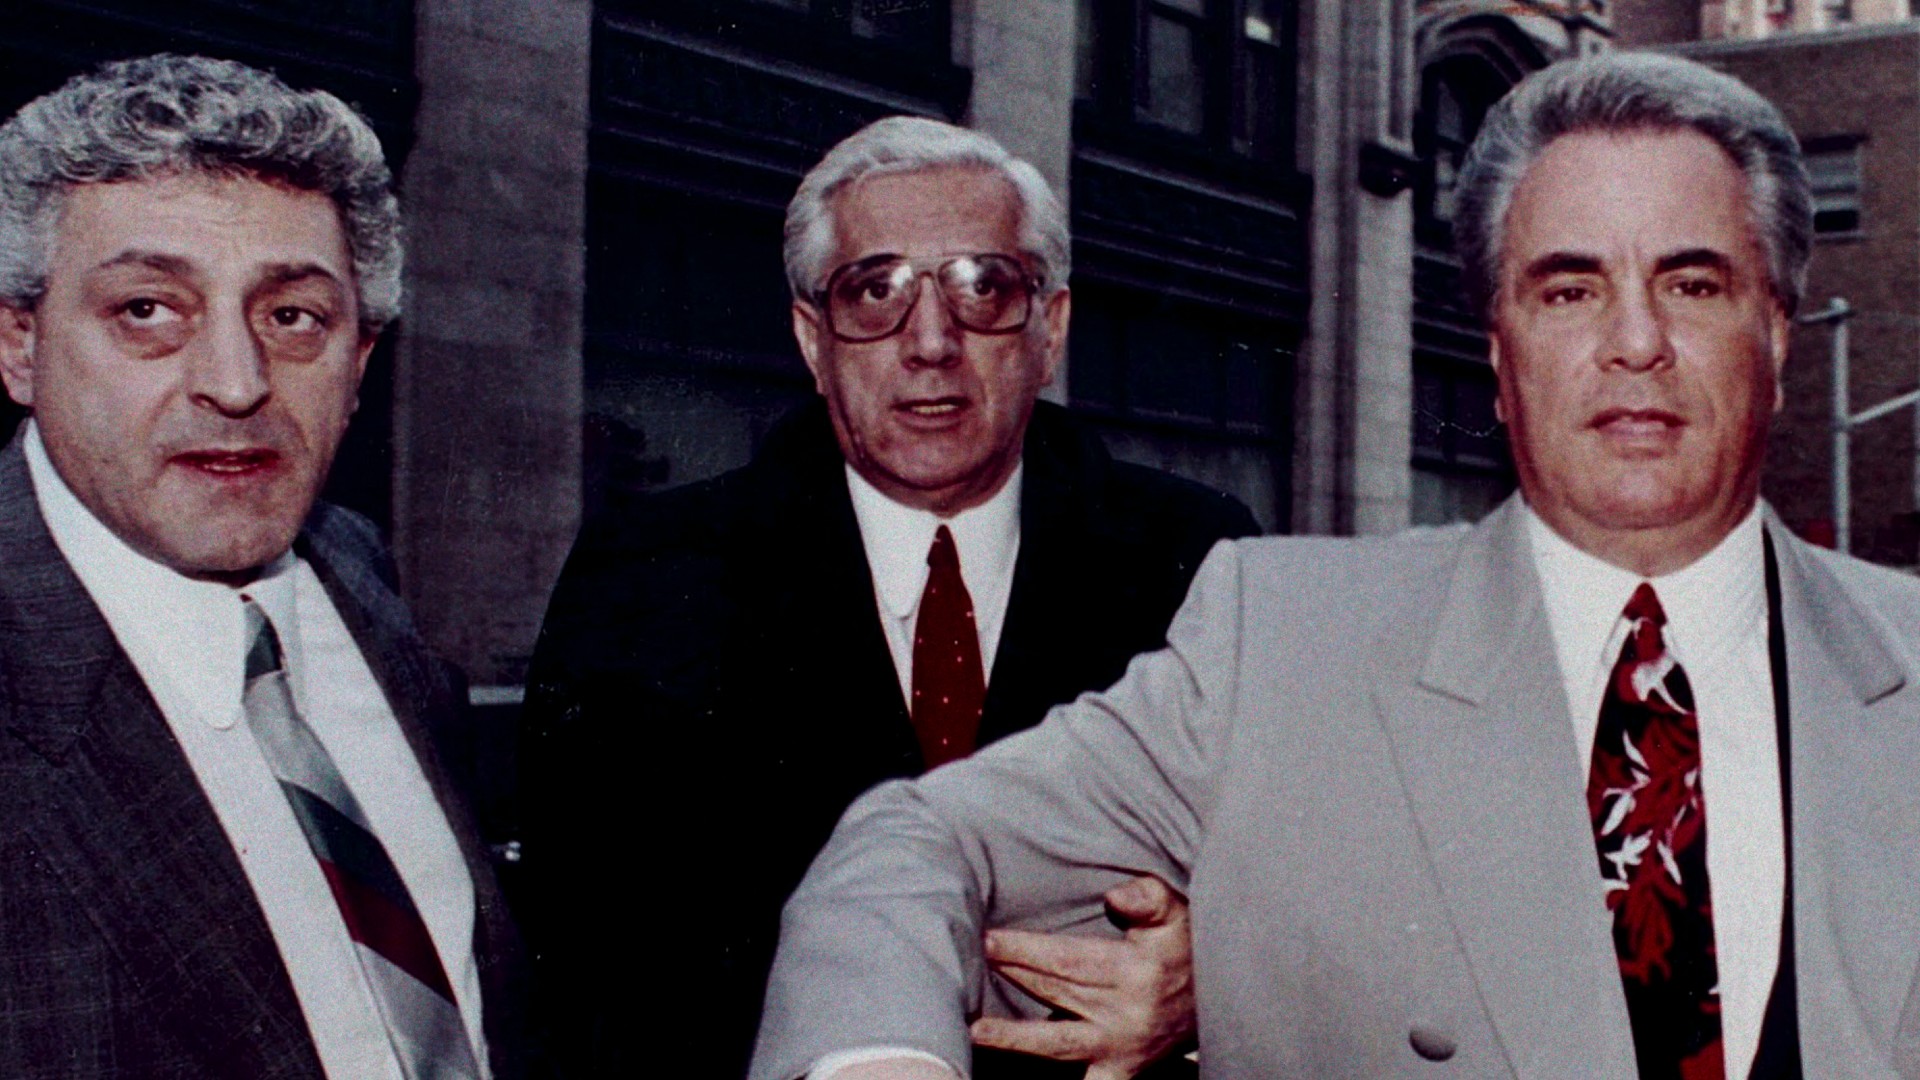 Get Gotti': Netflix Reveals How the FBI Nailed the Trump of Mobsters